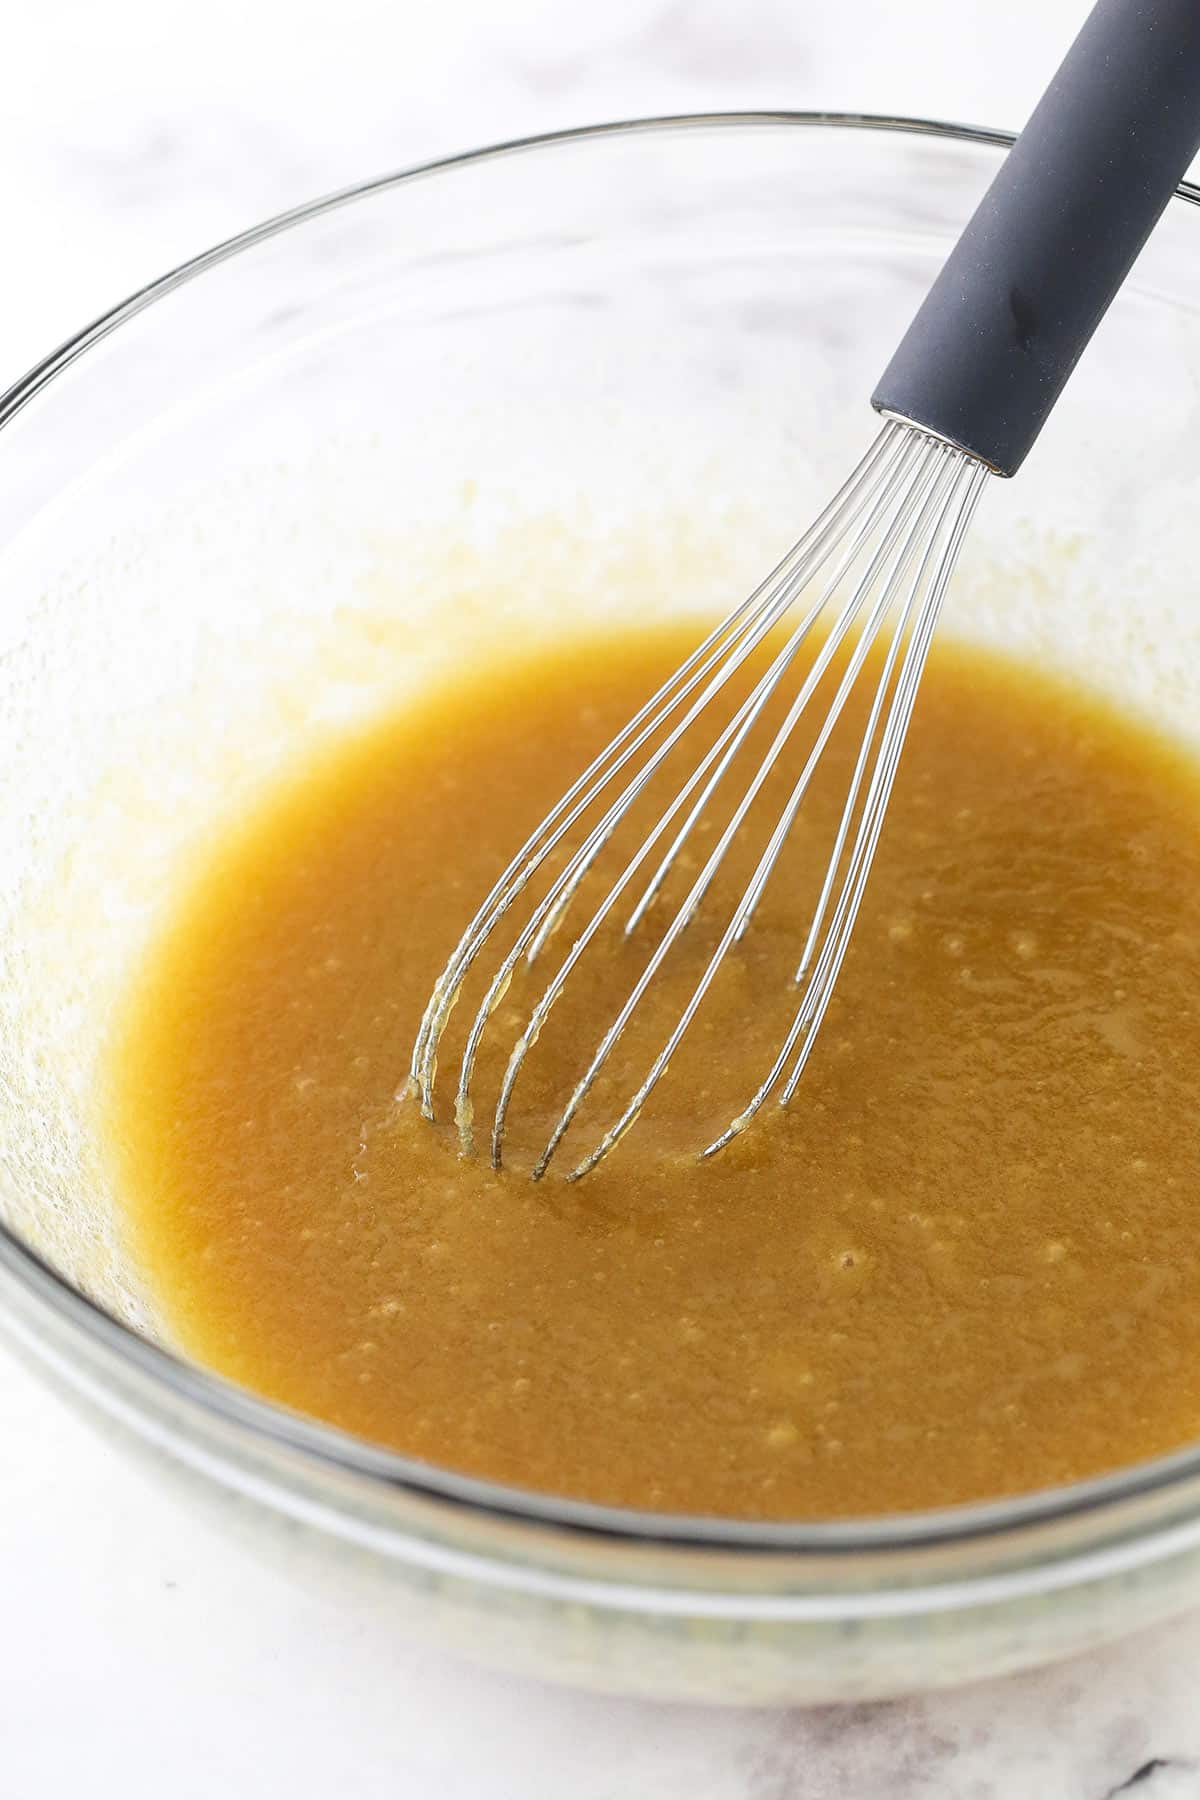 Mixing melted butter and sugar in a glass bowl